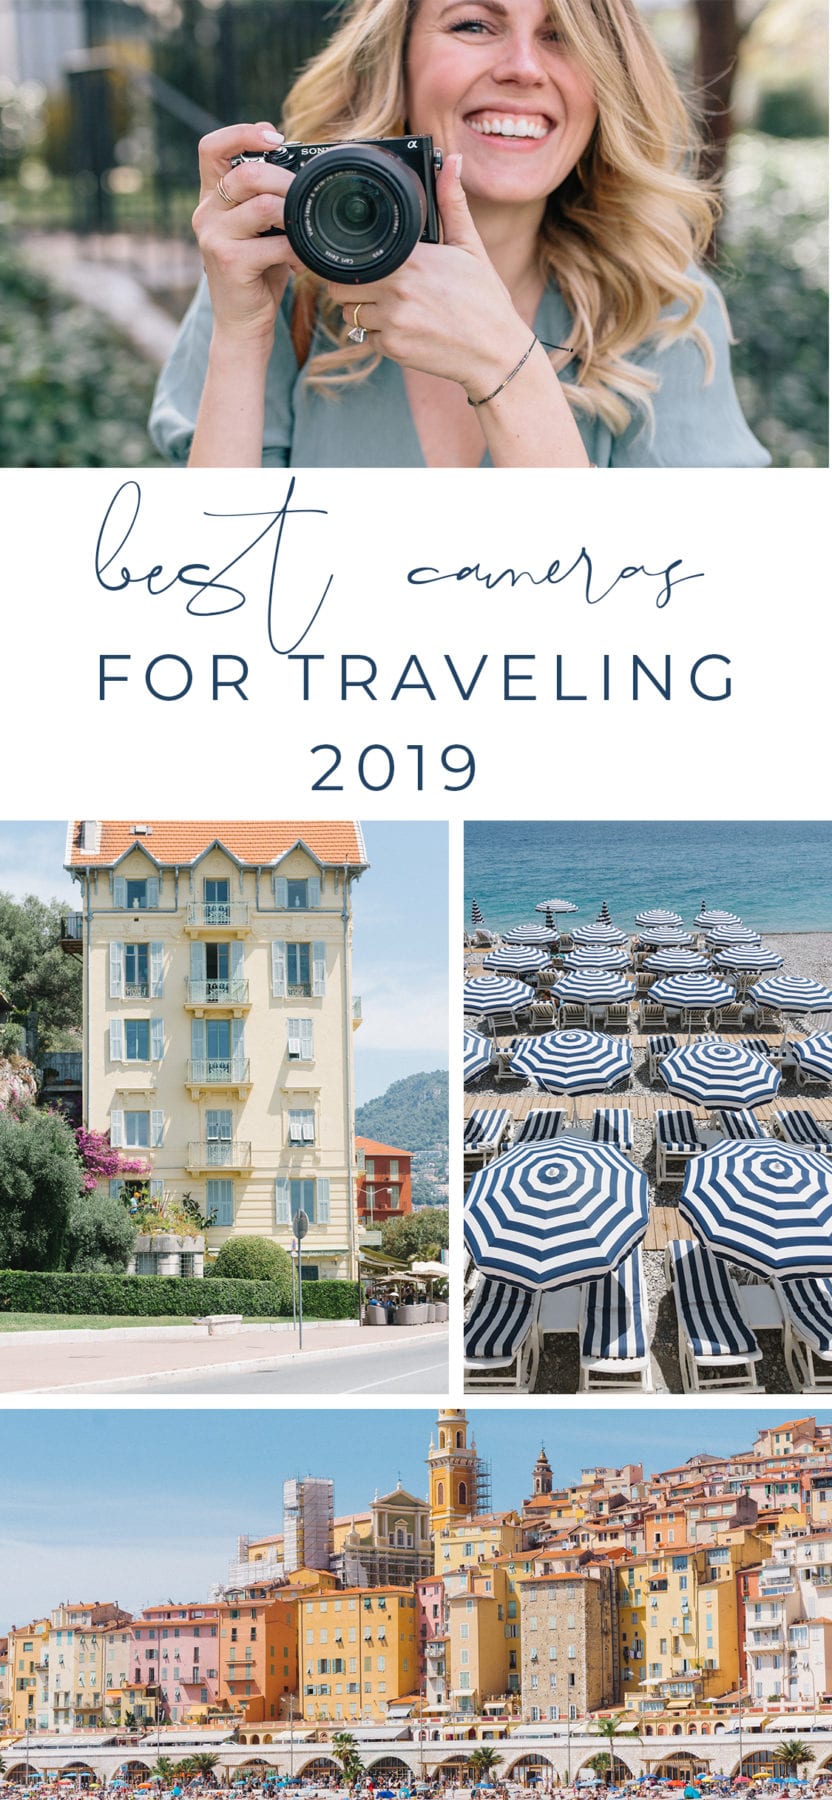 The Best Cameras for Traveling 2019